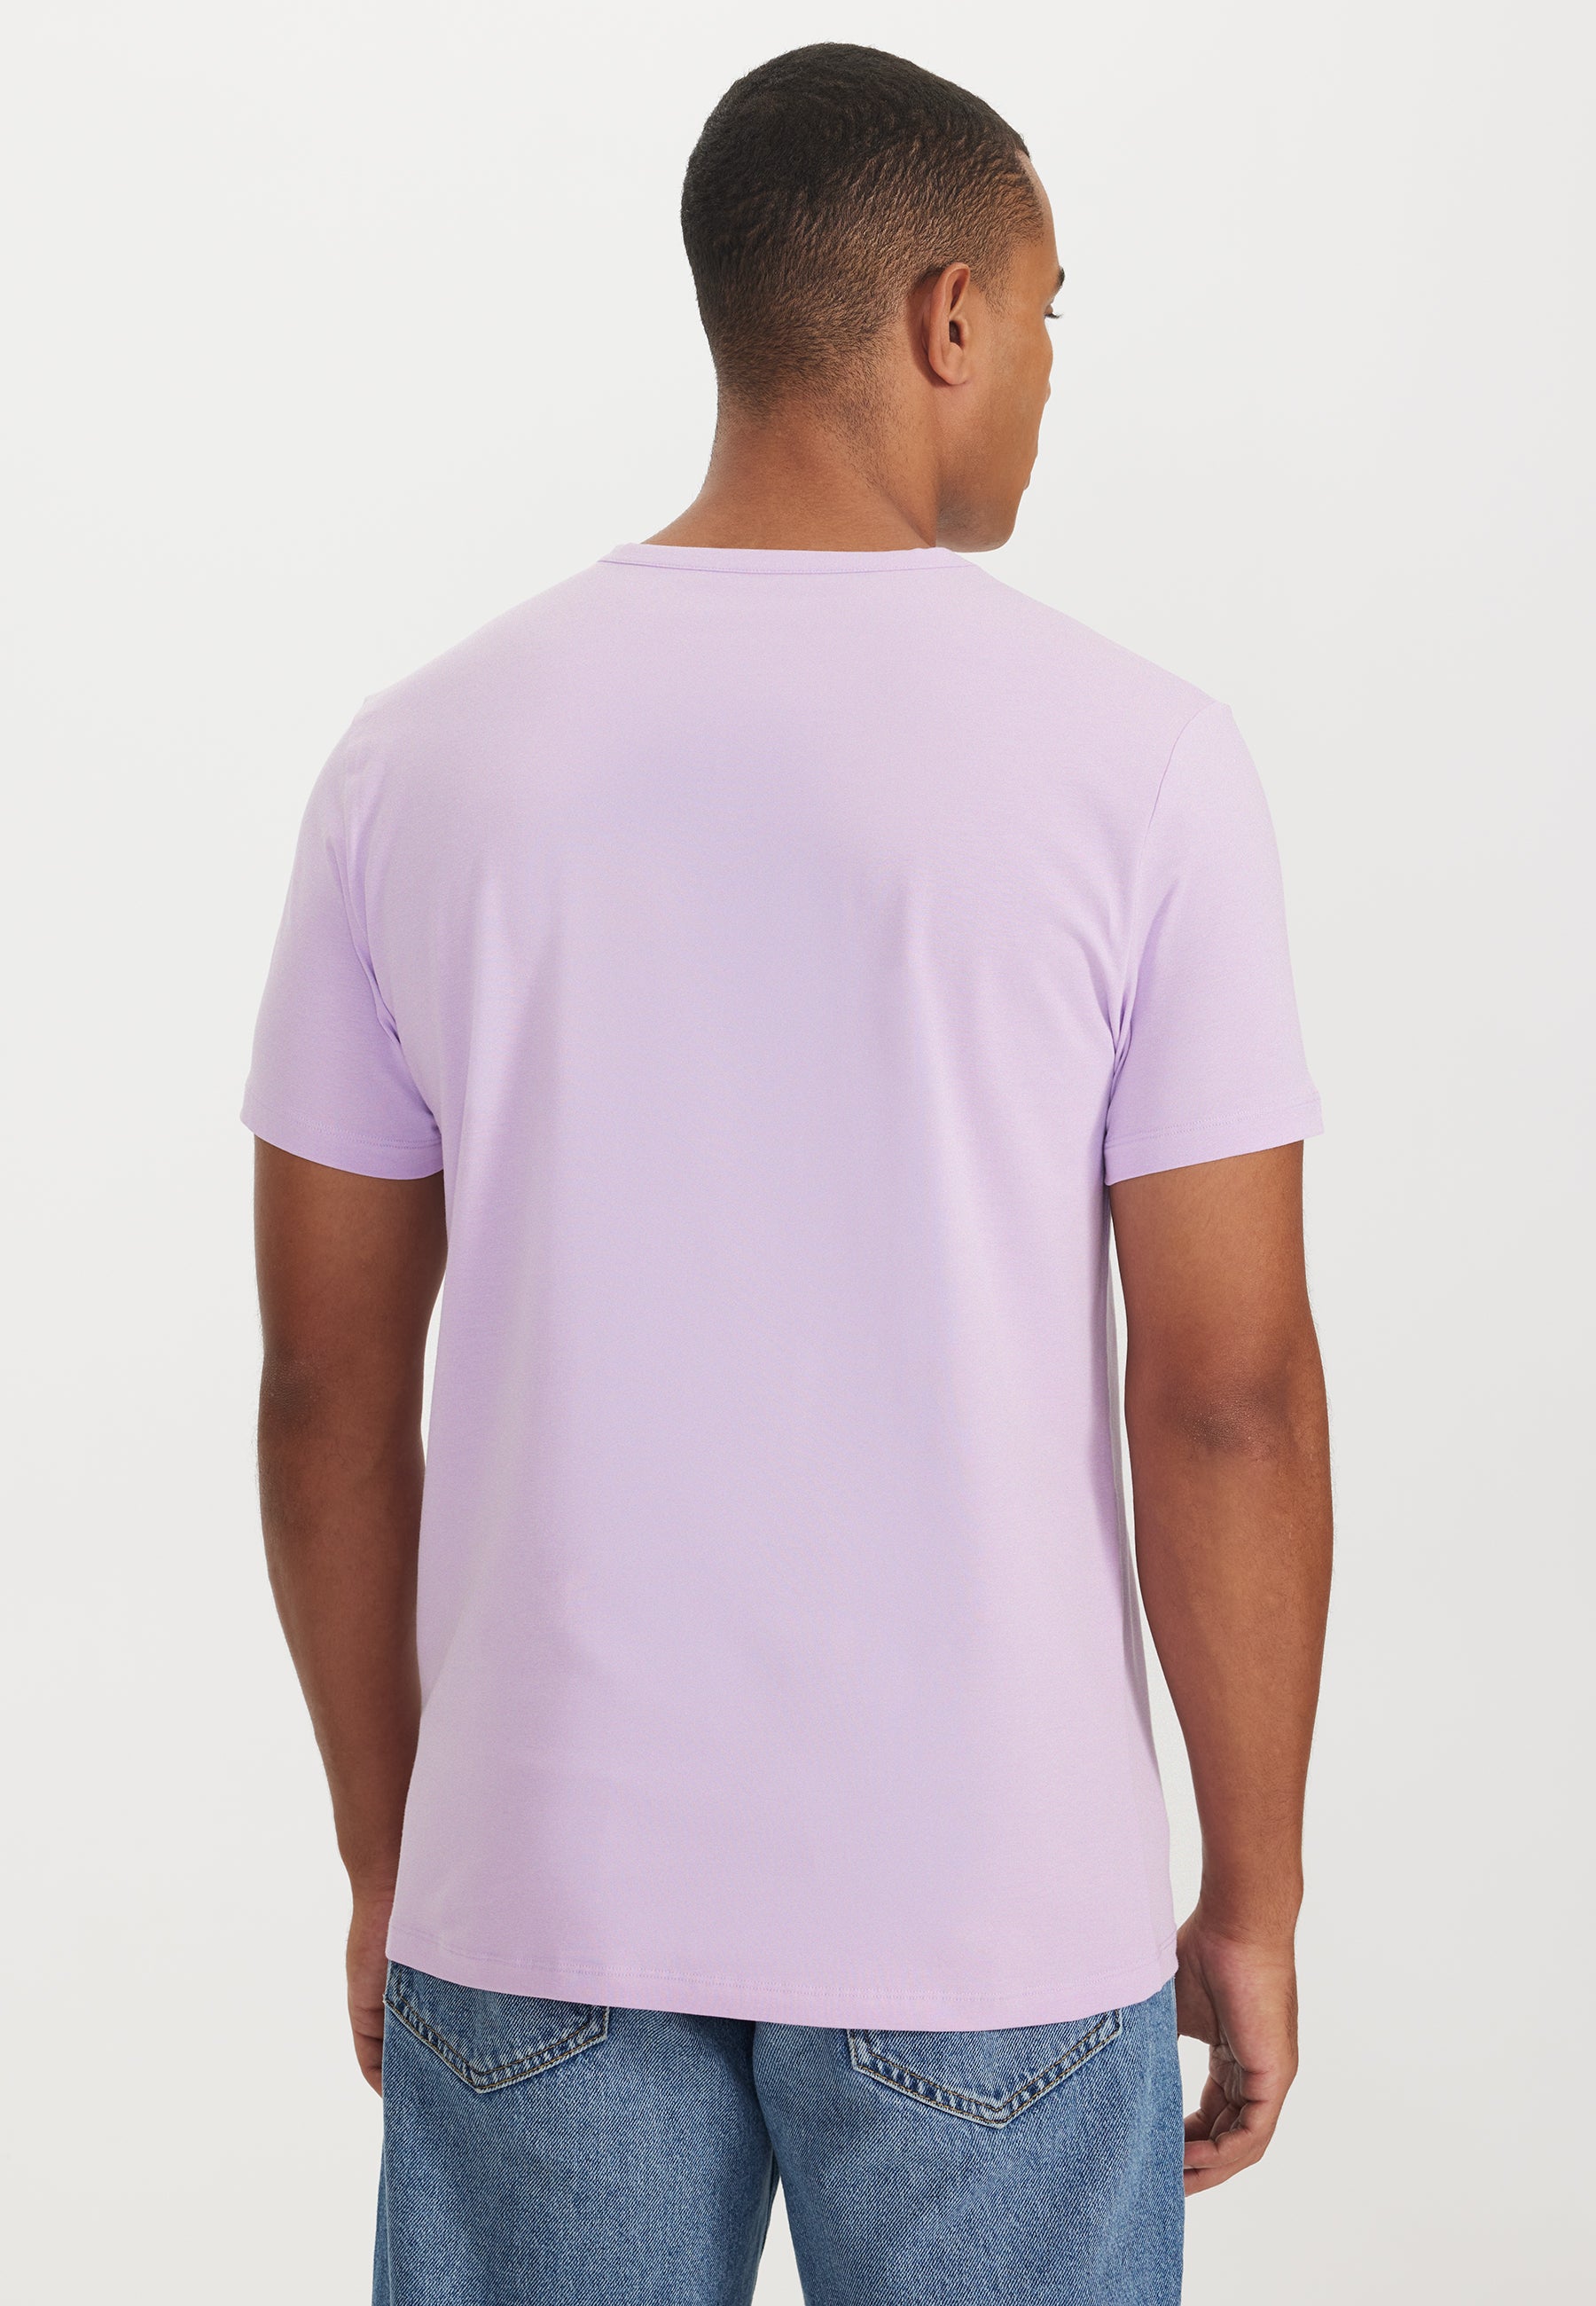 THEO V-NECK TEE in Lilac